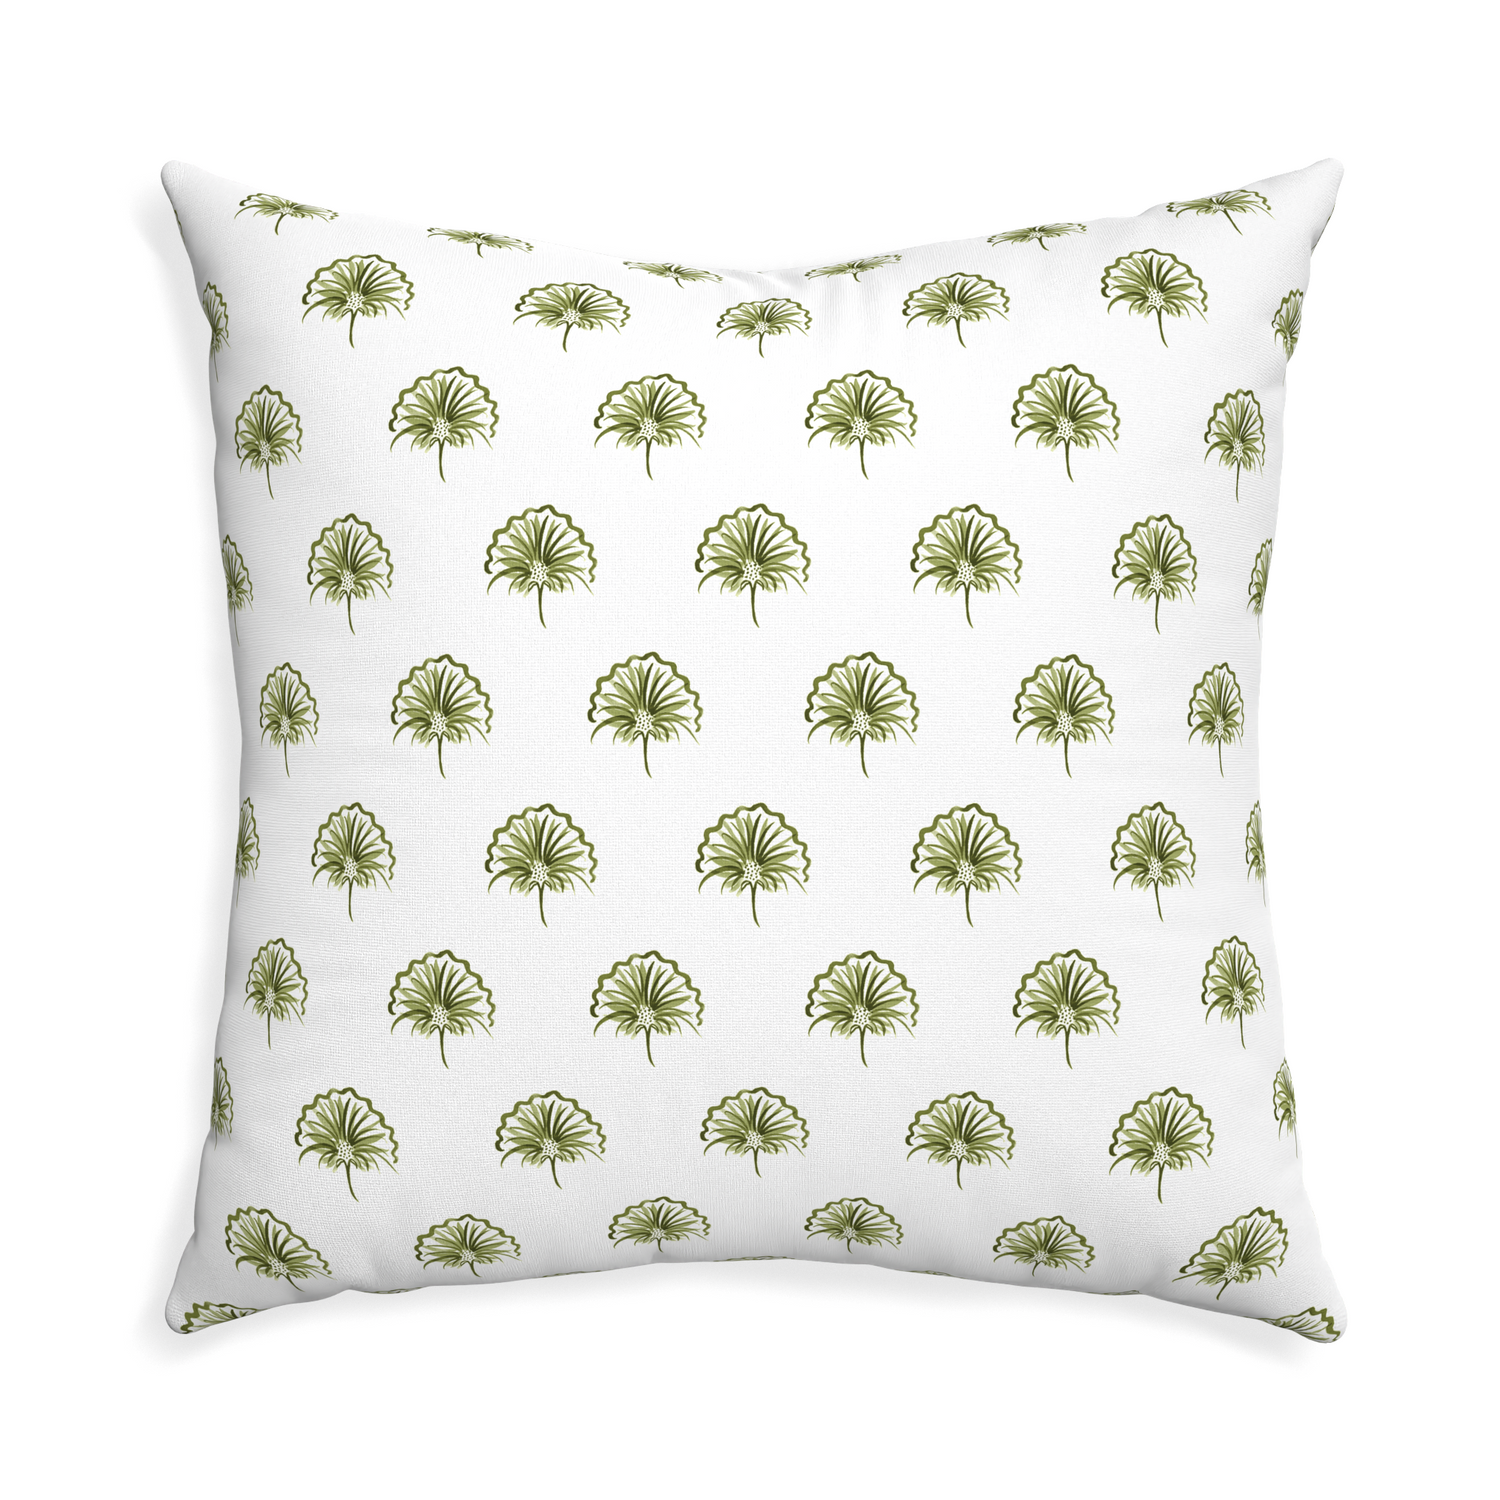 Euro-sham penelope moss custom green floralpillow with none on white background